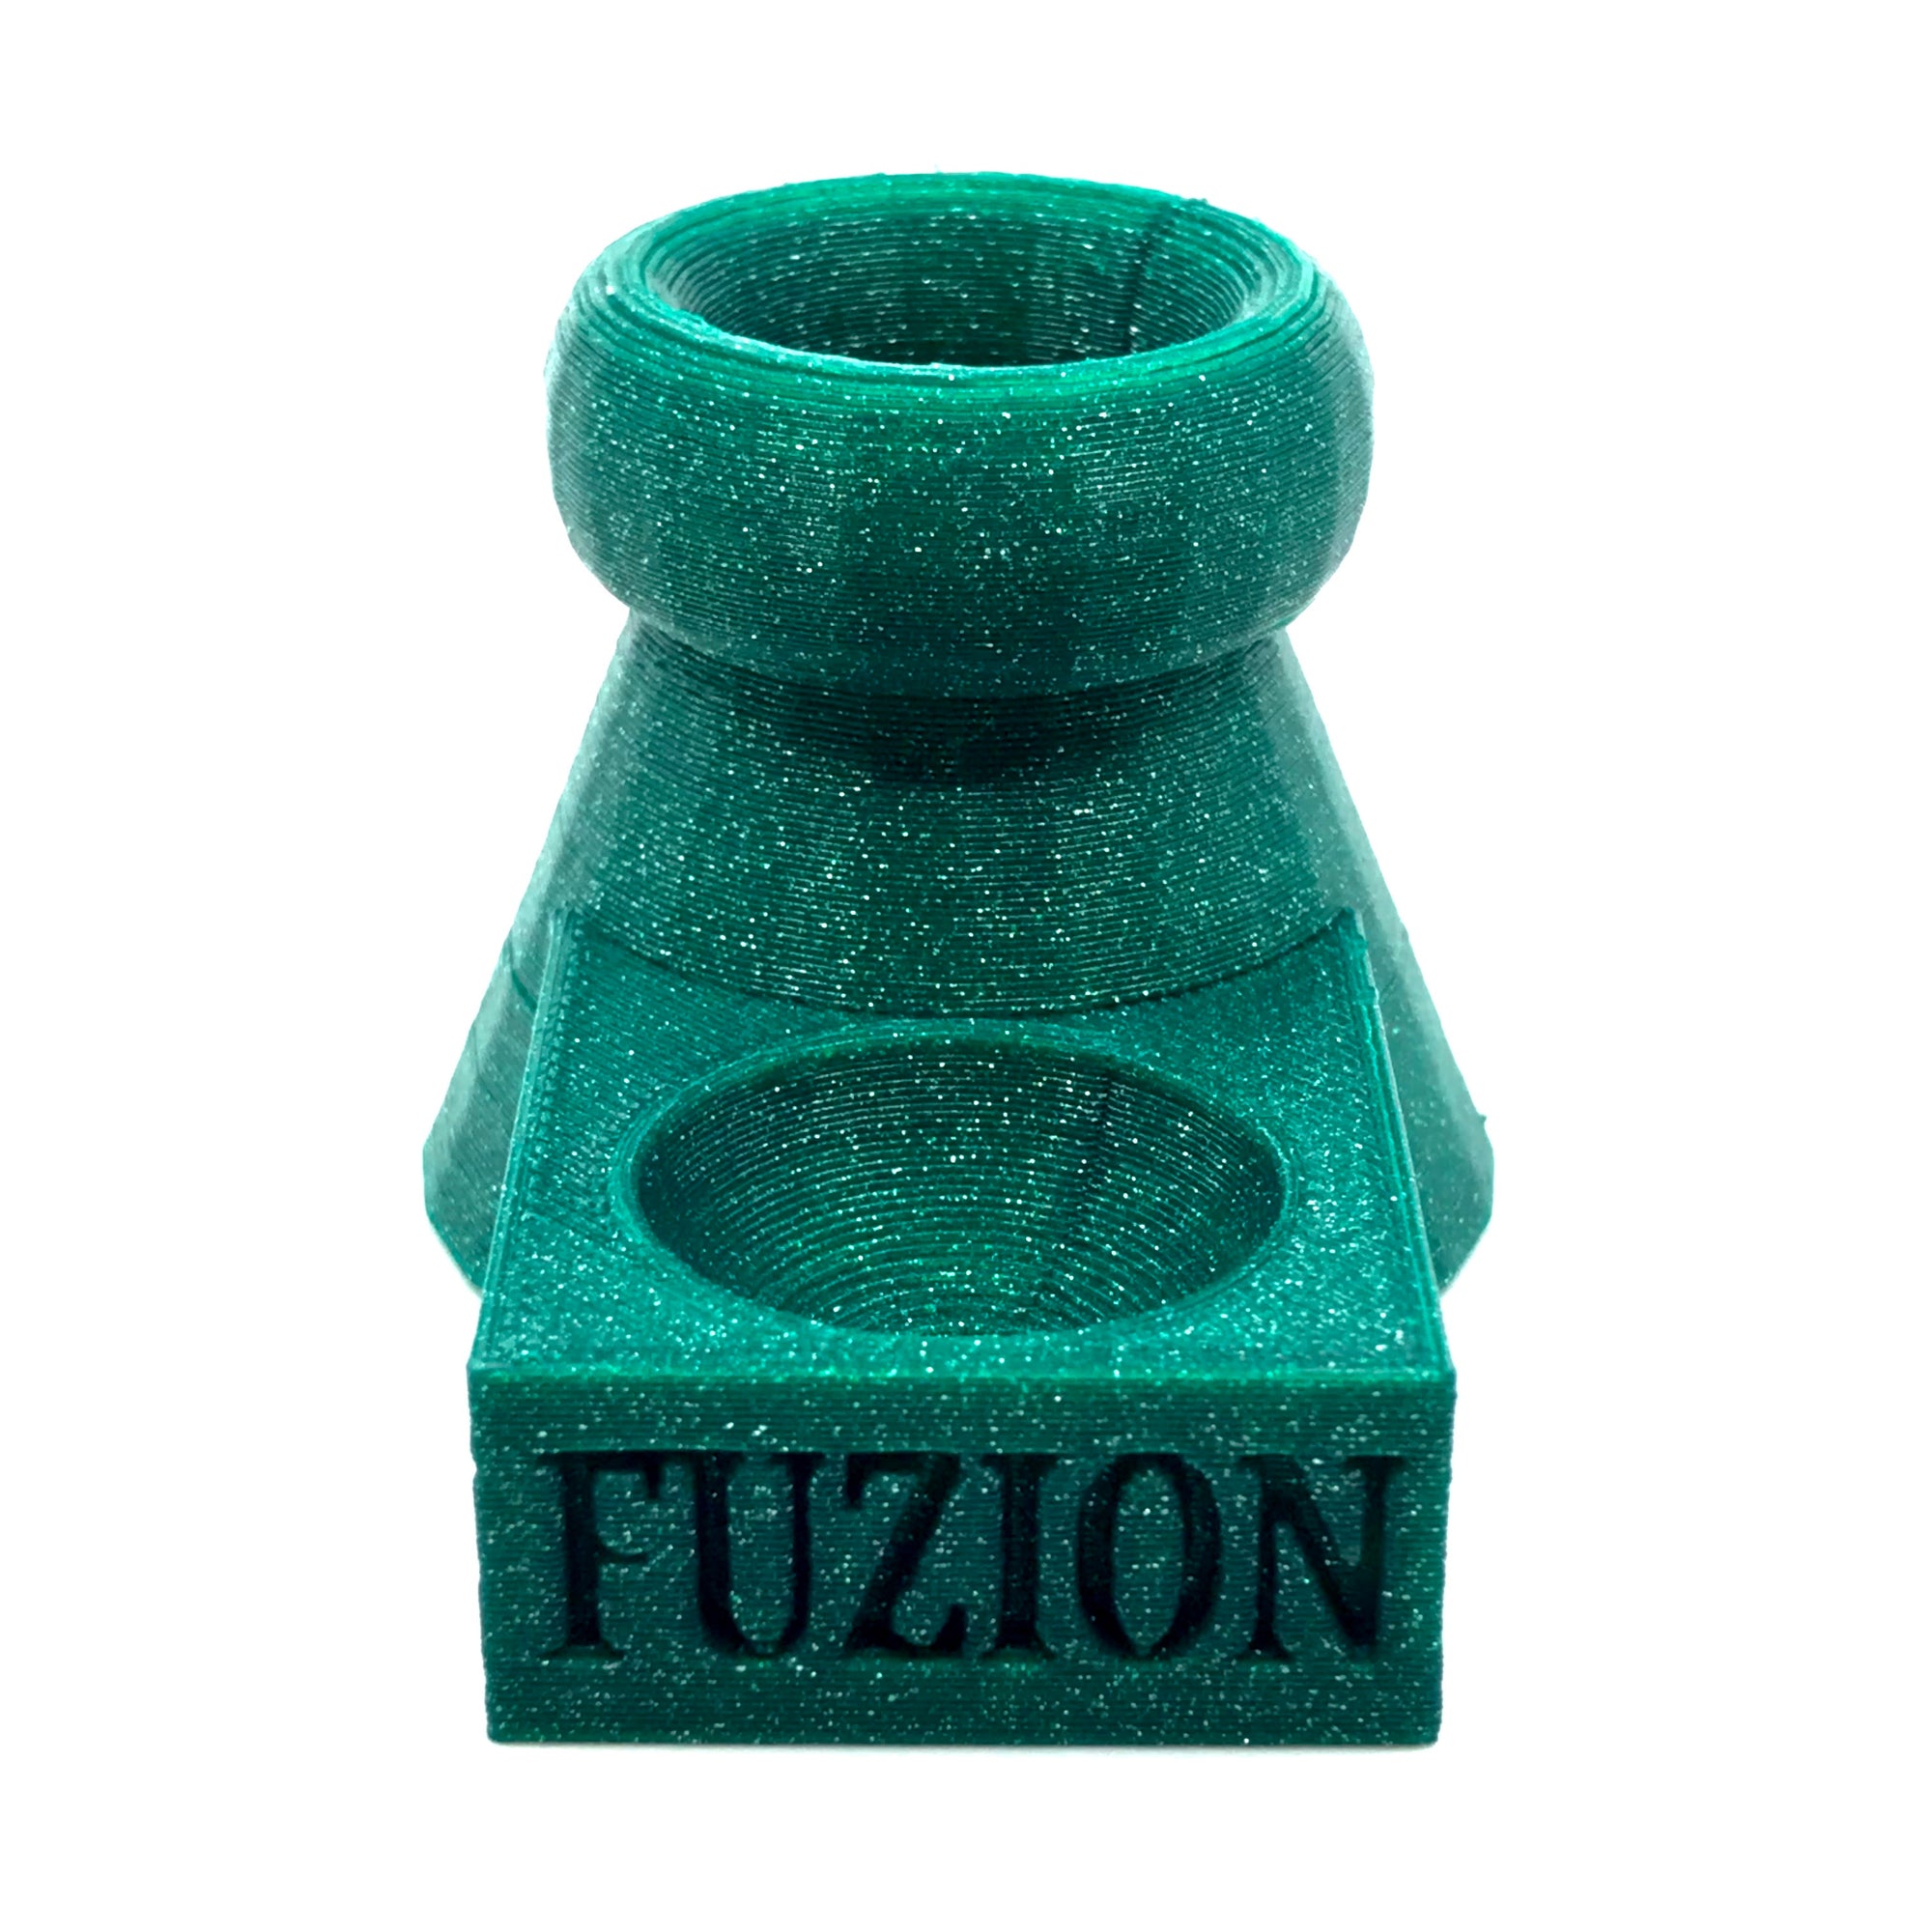 FUZION 3D Printed Bubble Cap and Terp Pearl Stand (Green Sparkle) show variants 